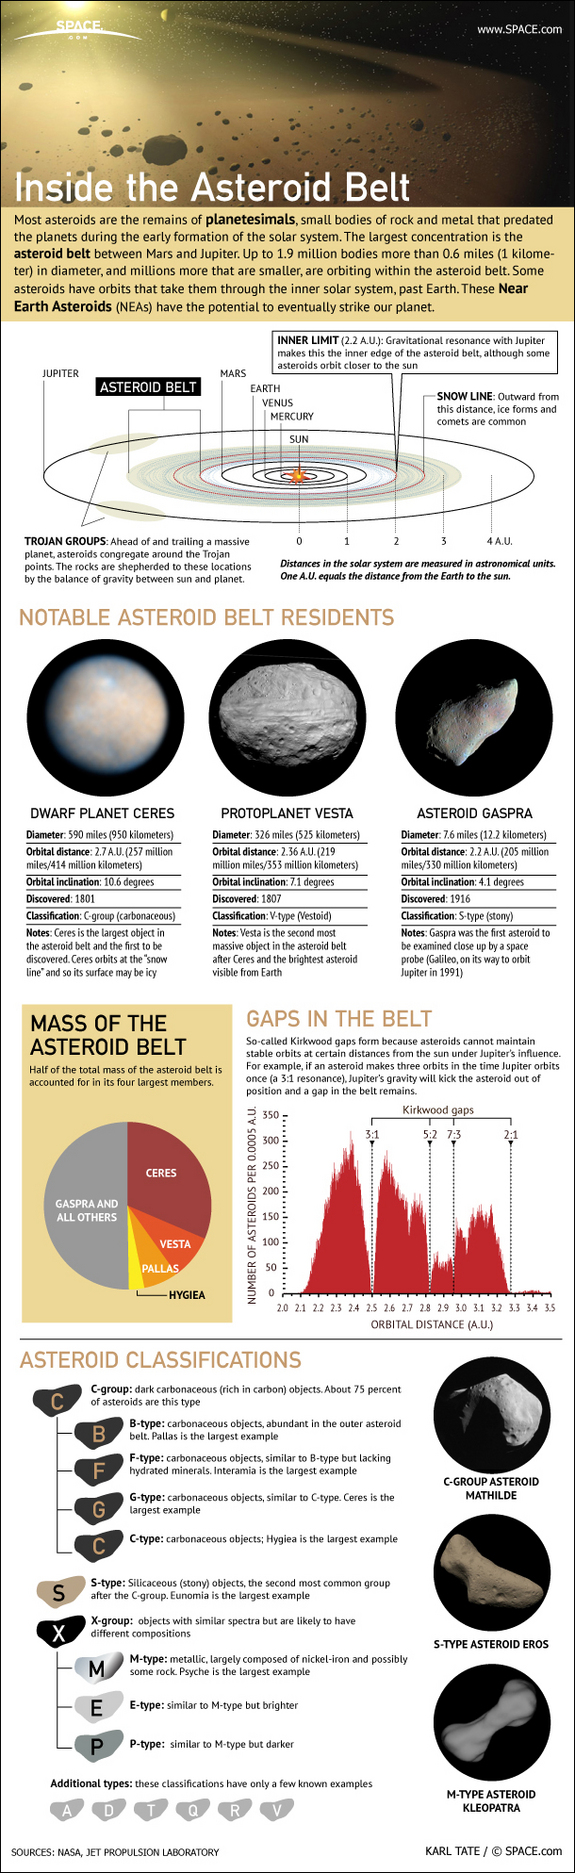 Find out all about the inhabitants of the asteroid belt  between Mars and Jupiter in this SPACE.com infographic.